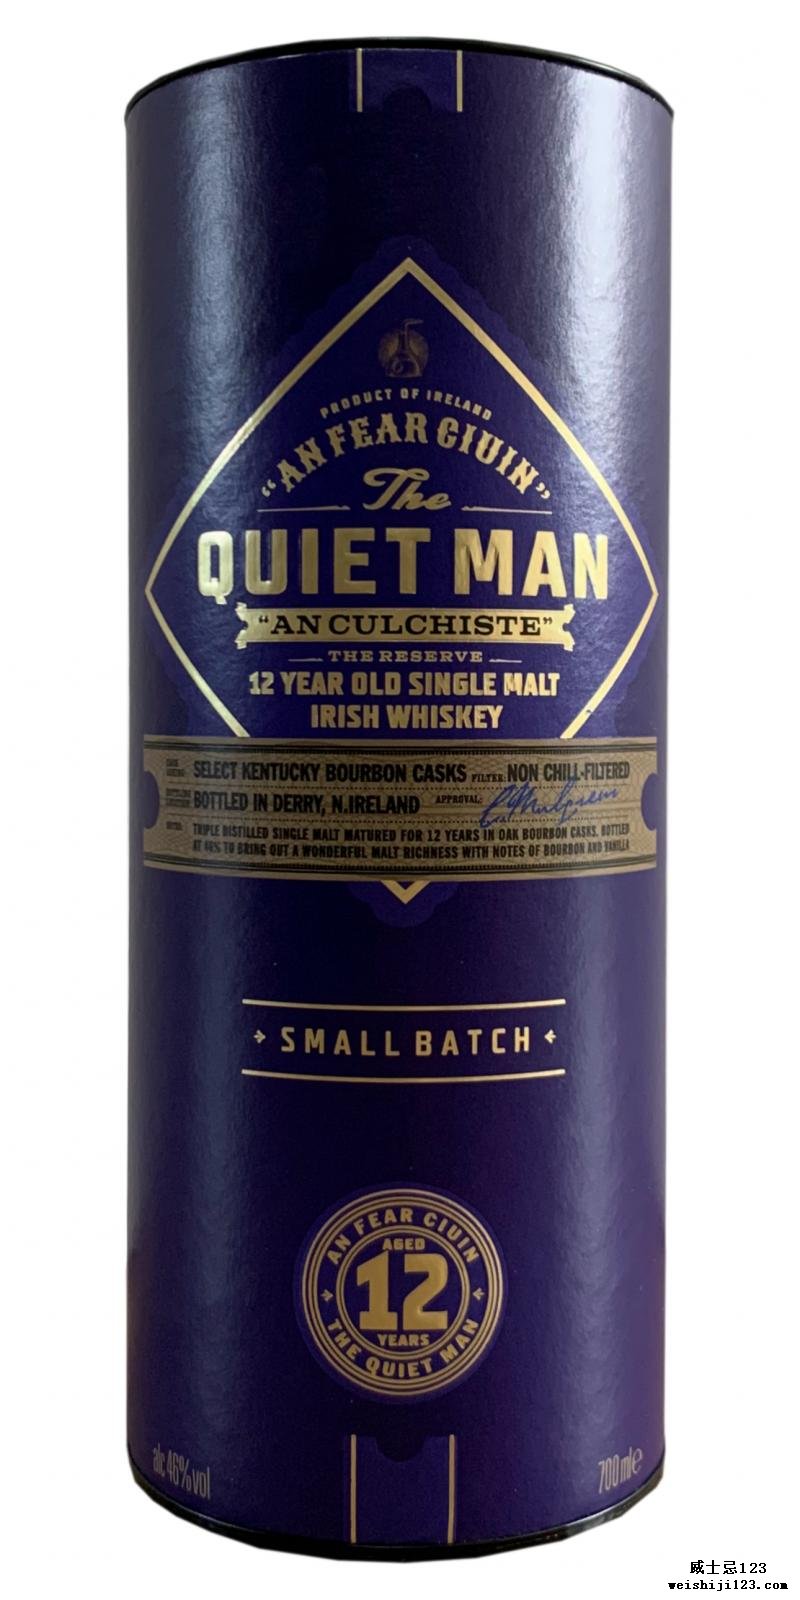 The Quiet Man 12-year-old